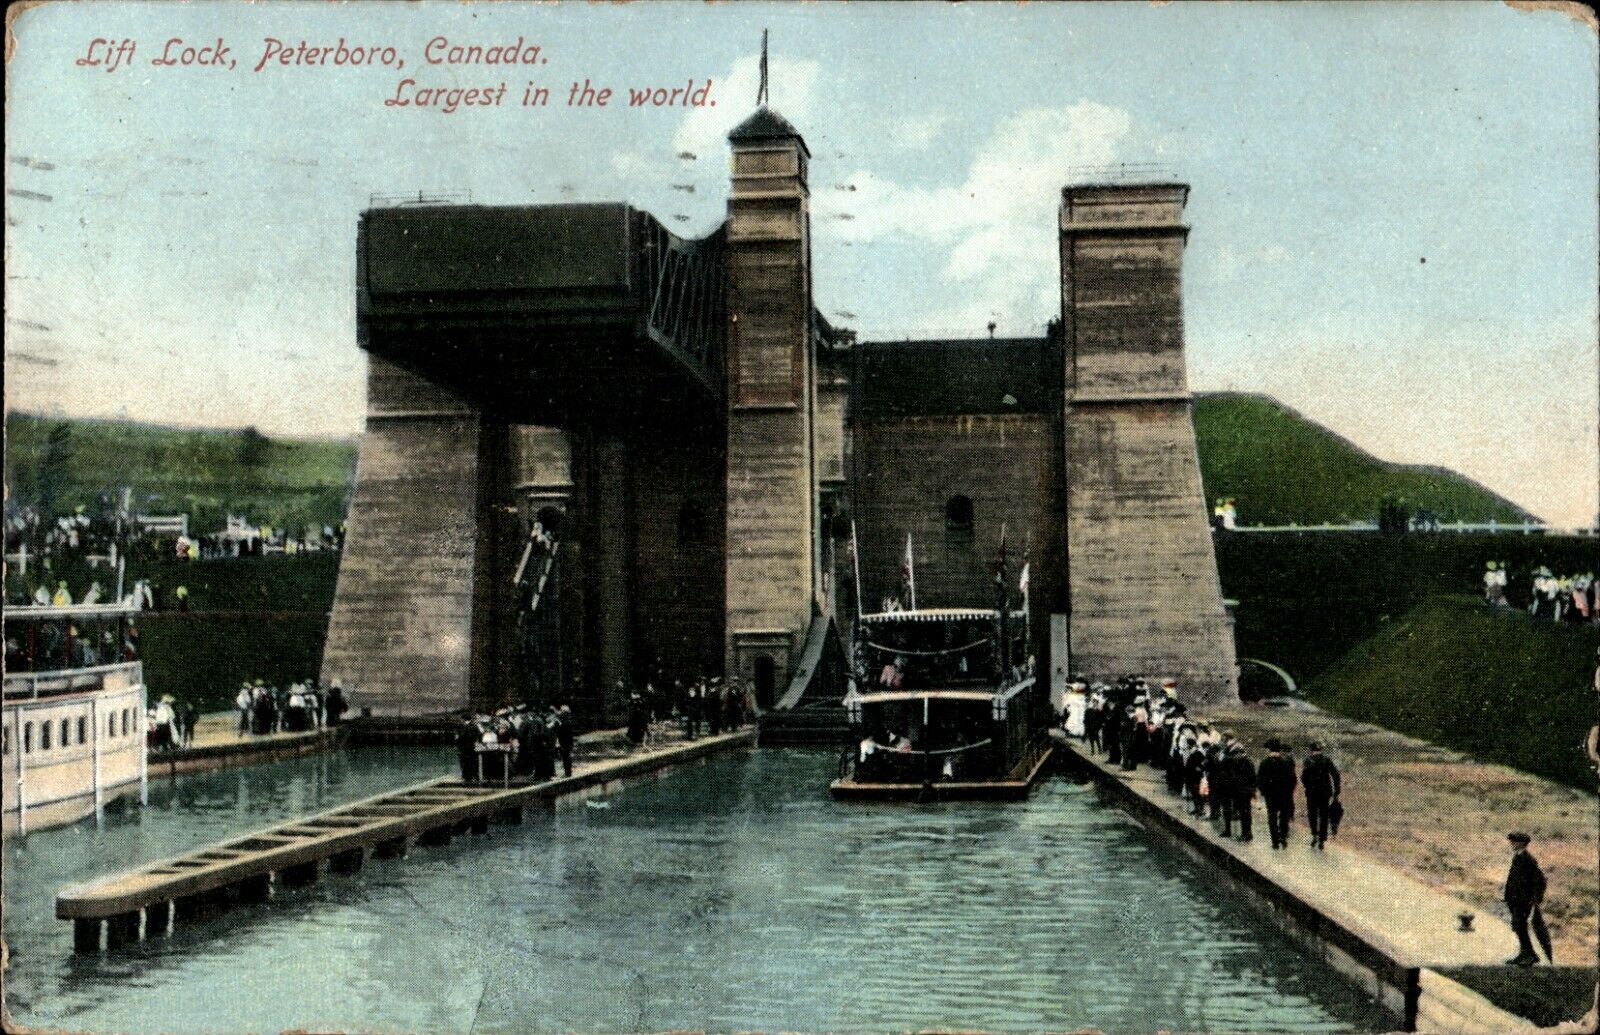 VTG Lift Lock Peterboro Canada Postcard 1910 Post Marked Largest in the World